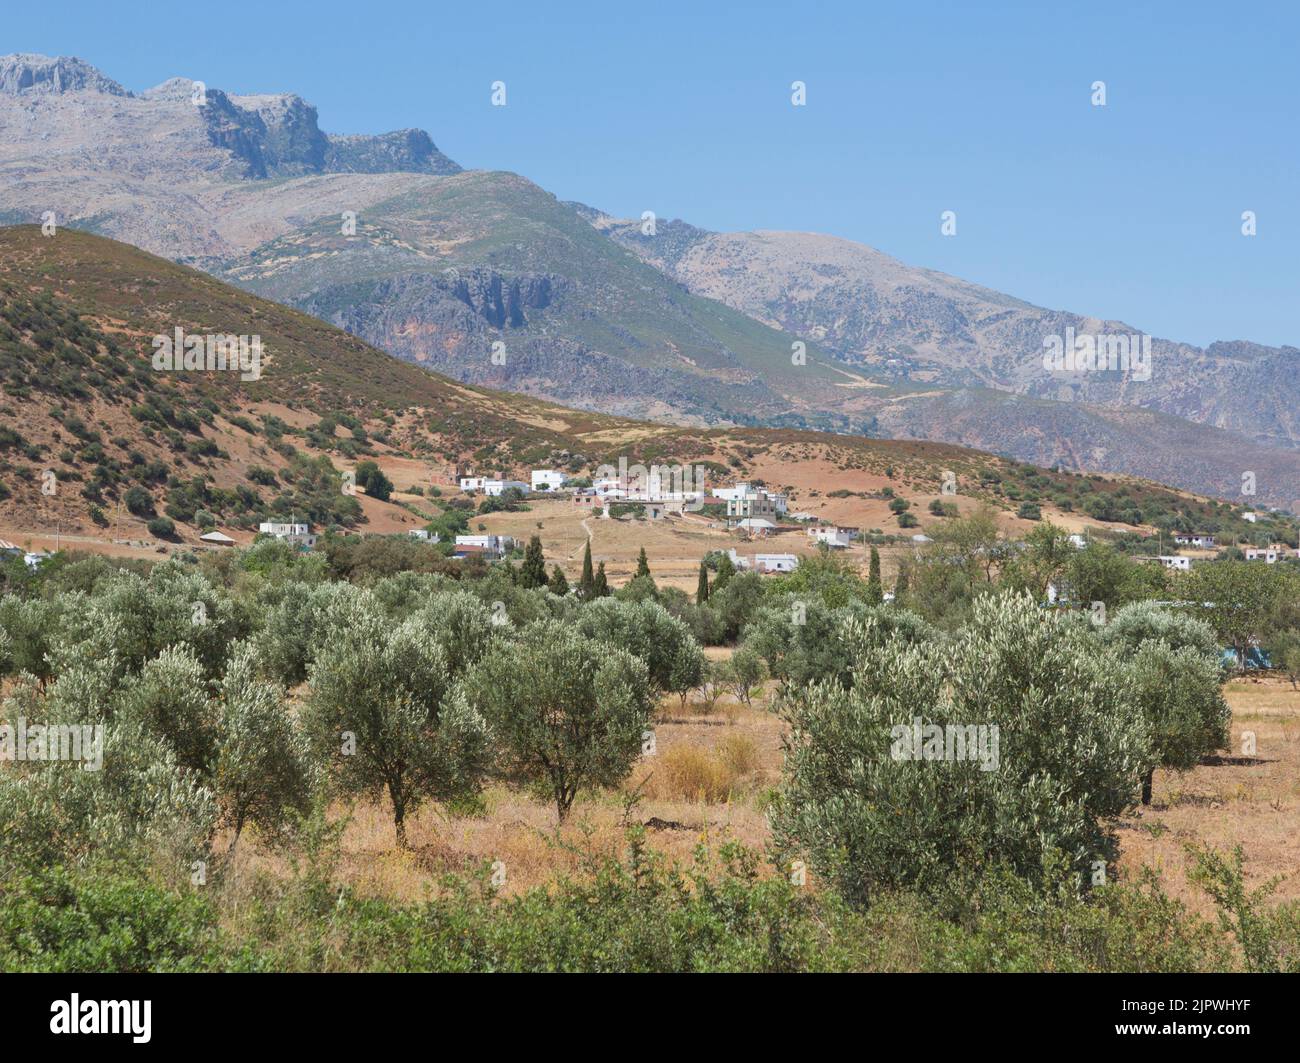 Countryside and olive grove near Chefchaouen, Morocco. Stock Photo